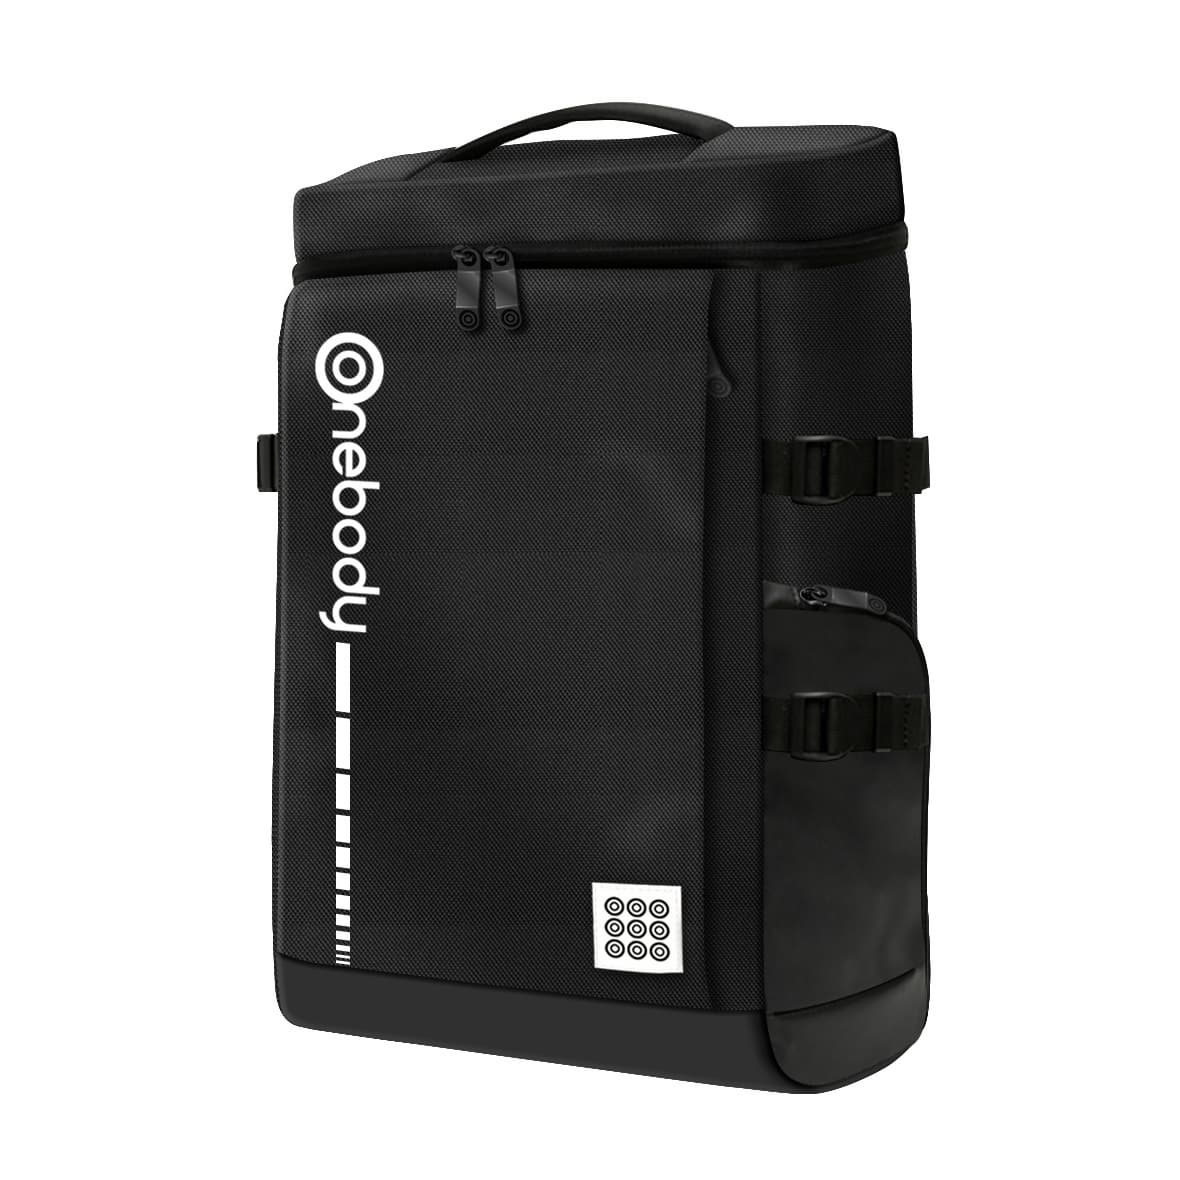 Onebody Laptop Backpack Bag_08 for Travel Business Casual